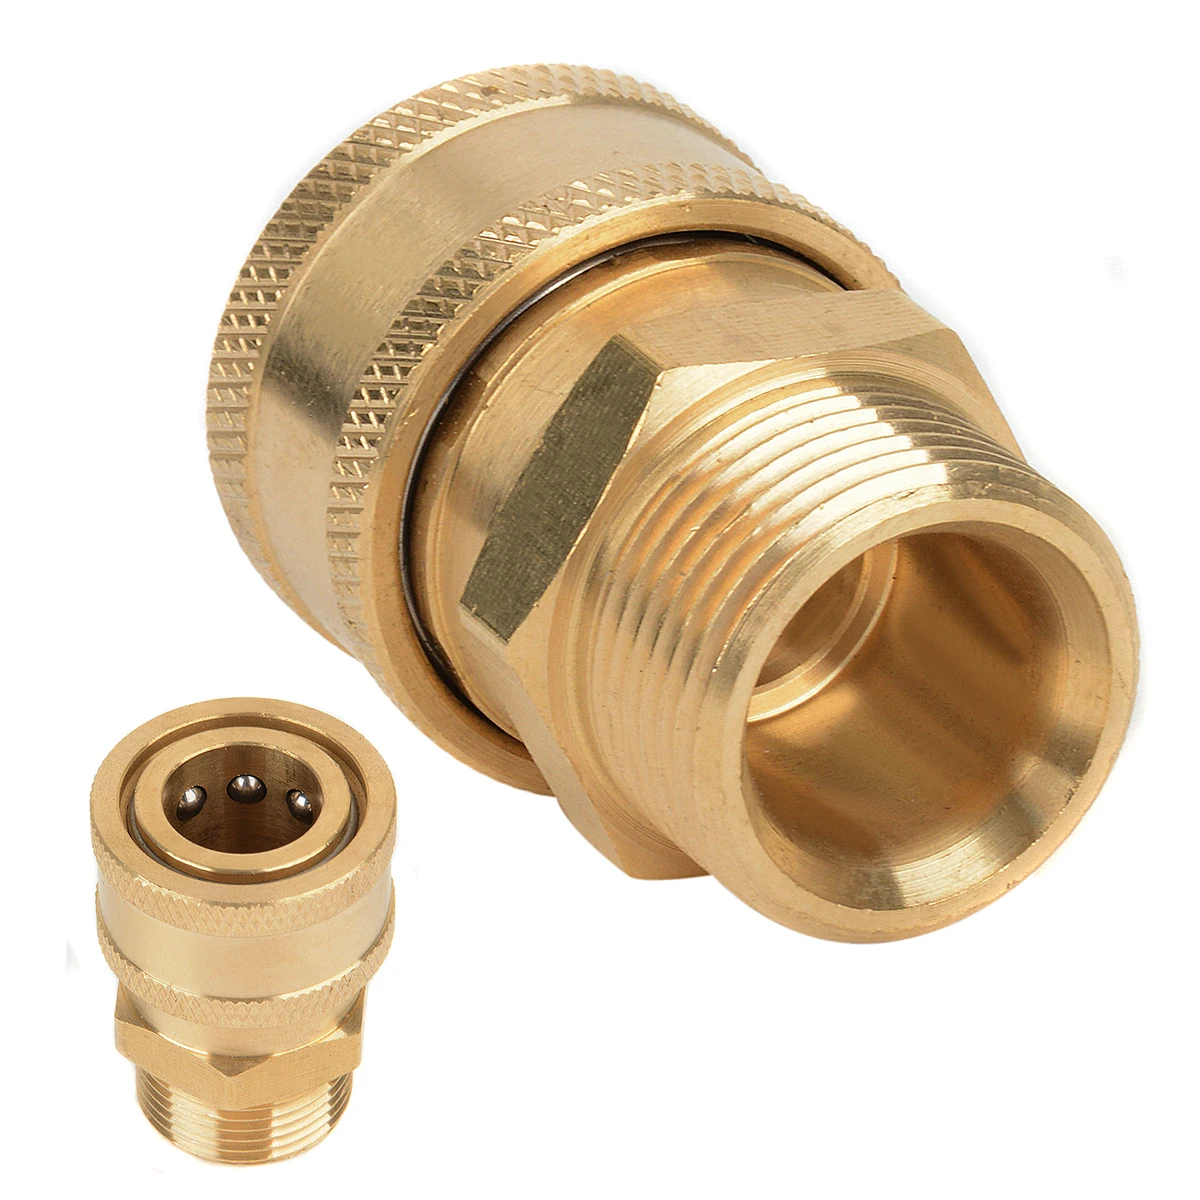 

1pc 3/8" Quick Release Adapter Connector Connect to M22 Metric Male Thread Fitting For Pressure Washer Hose Garden Joints Mayitr